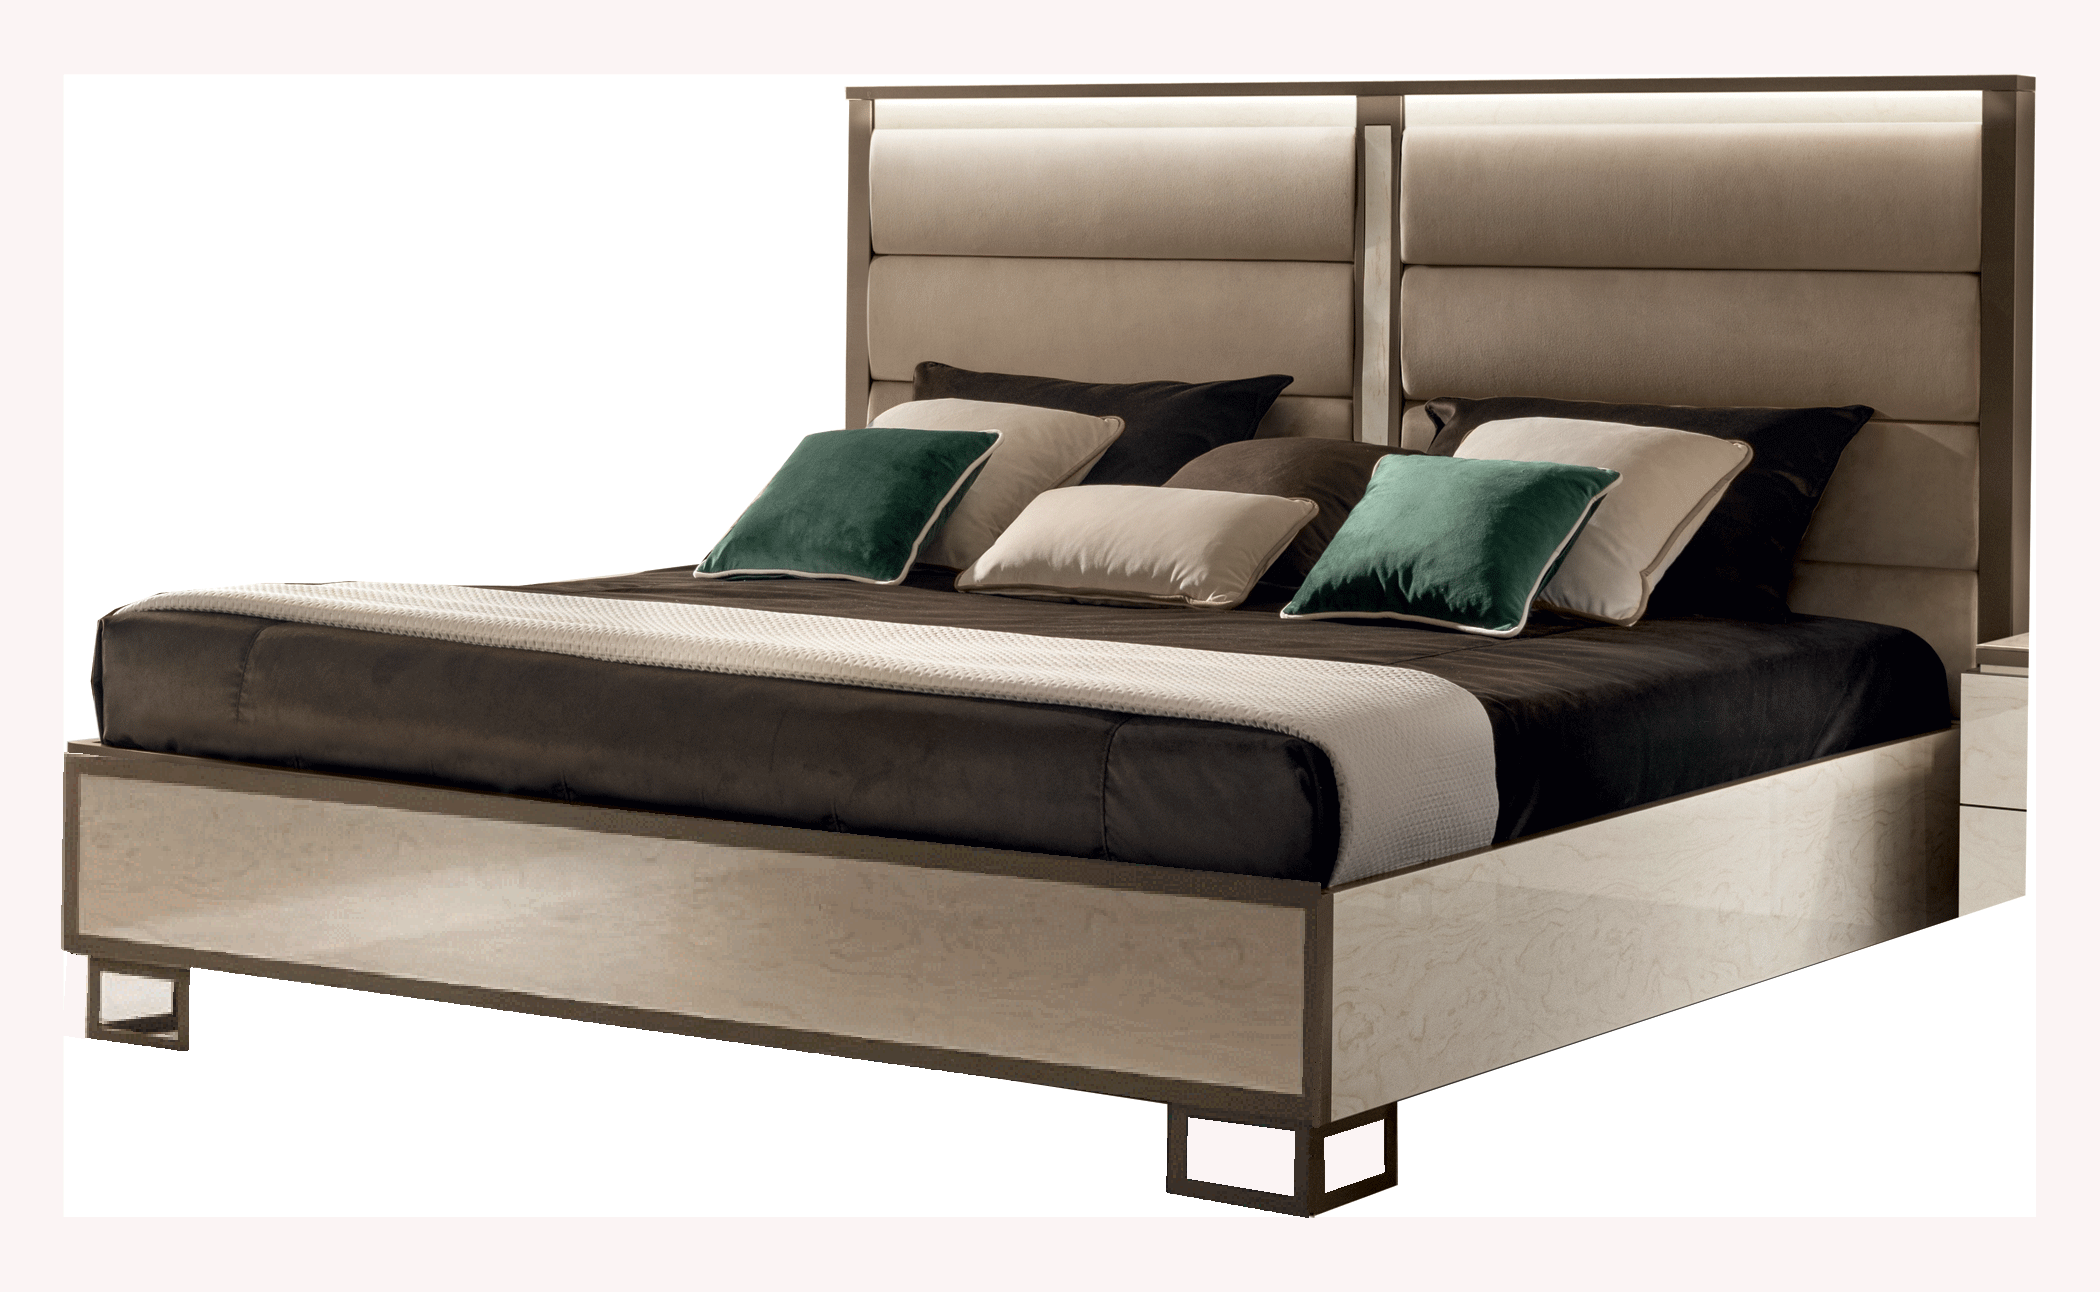 Brands Arredoclassic Living Room, Italy Poesia Bed